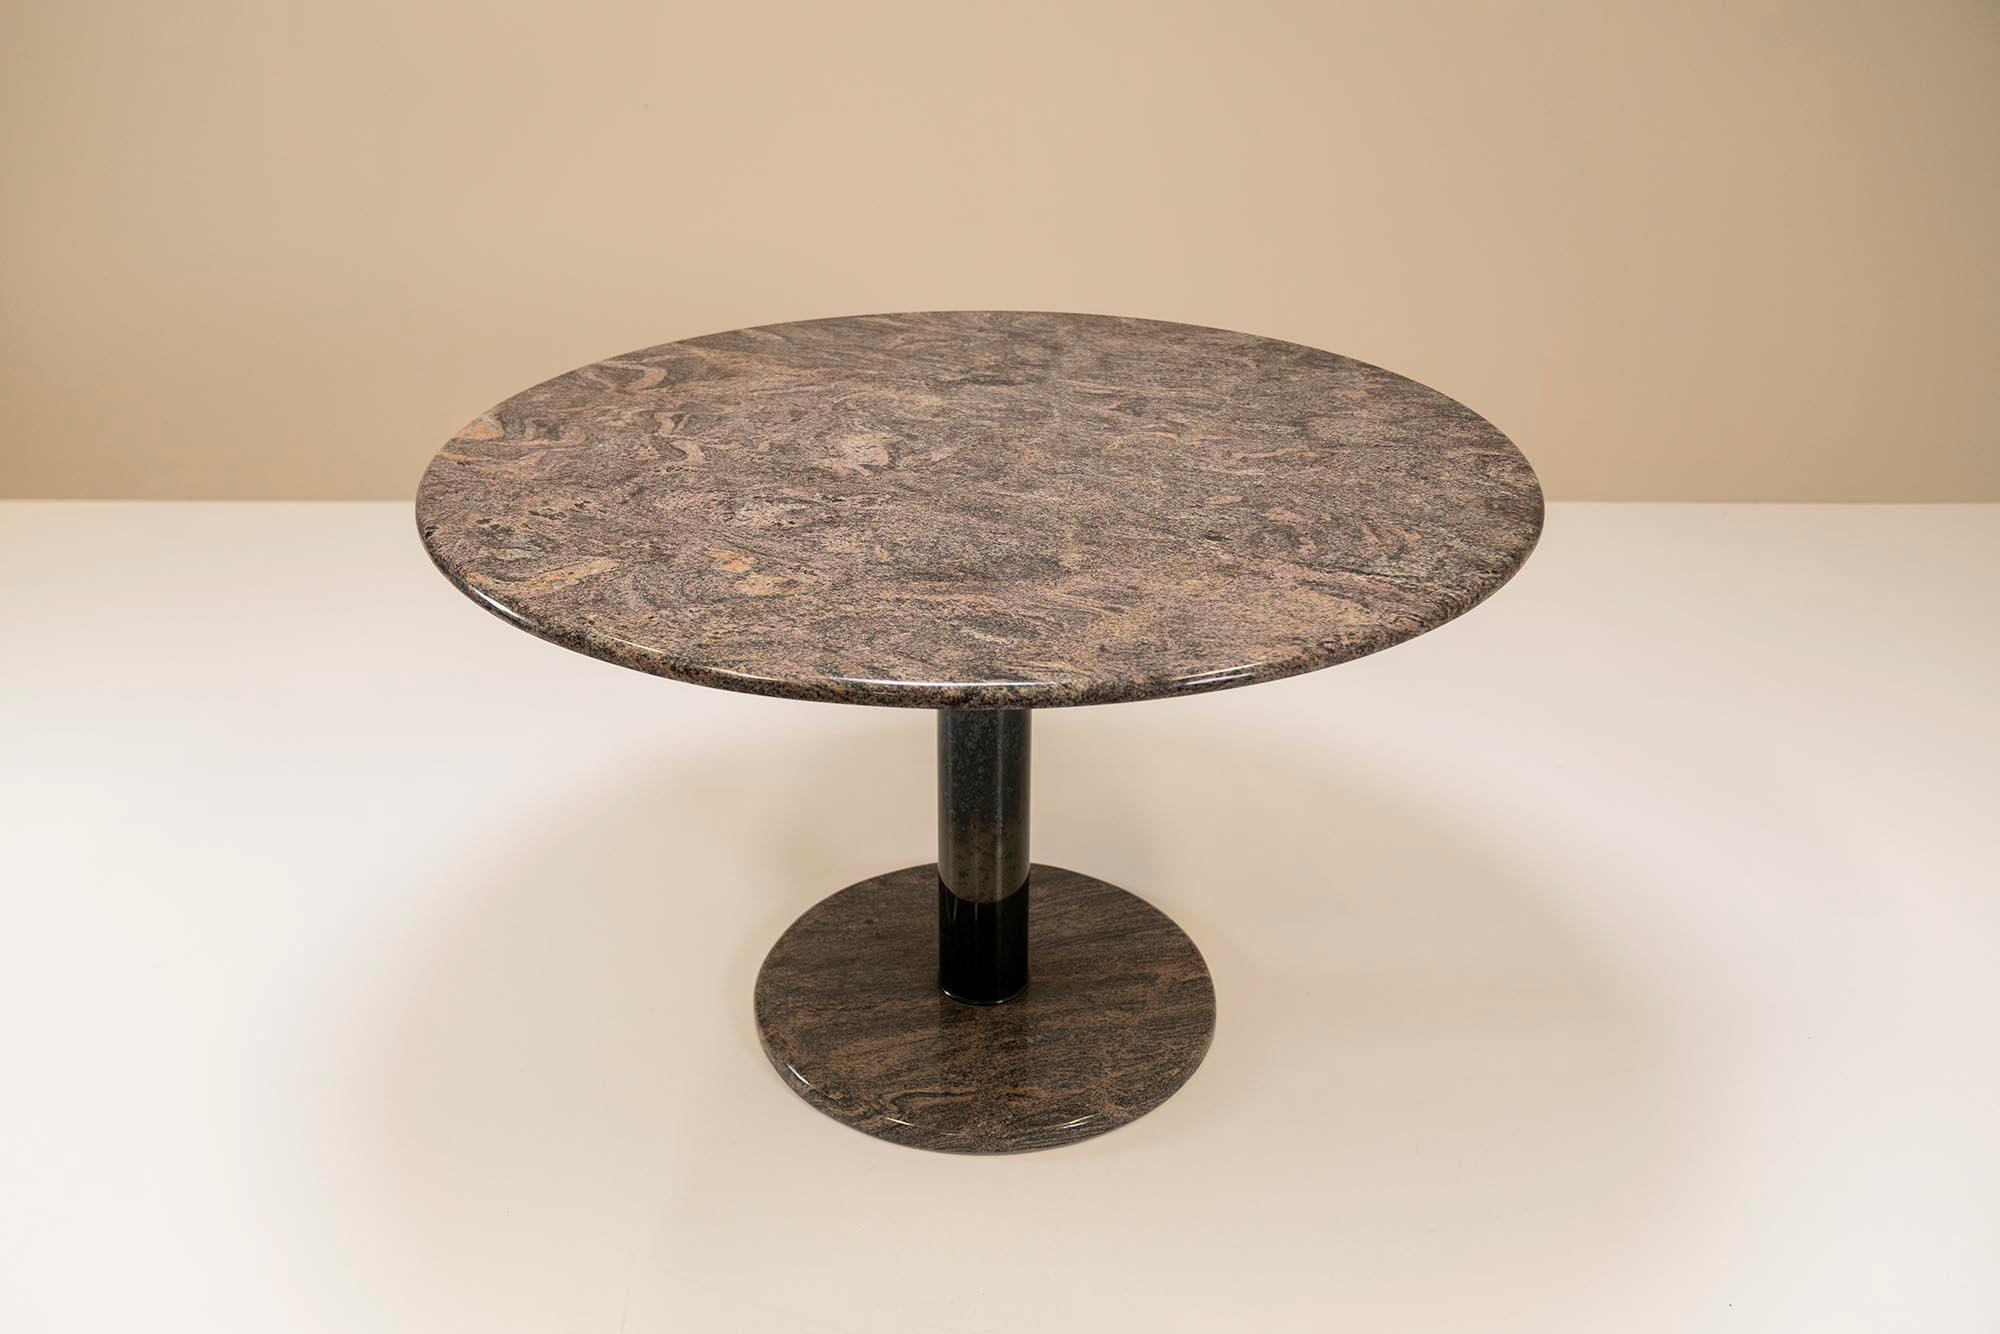 Stunning vintage round marble dinner table with rose, grey colored marble. The color gives this table a modern, yet warm and more unique look. The tabletop rests on a foot of iron and marble. The table is in excellent condition and has no chips. It